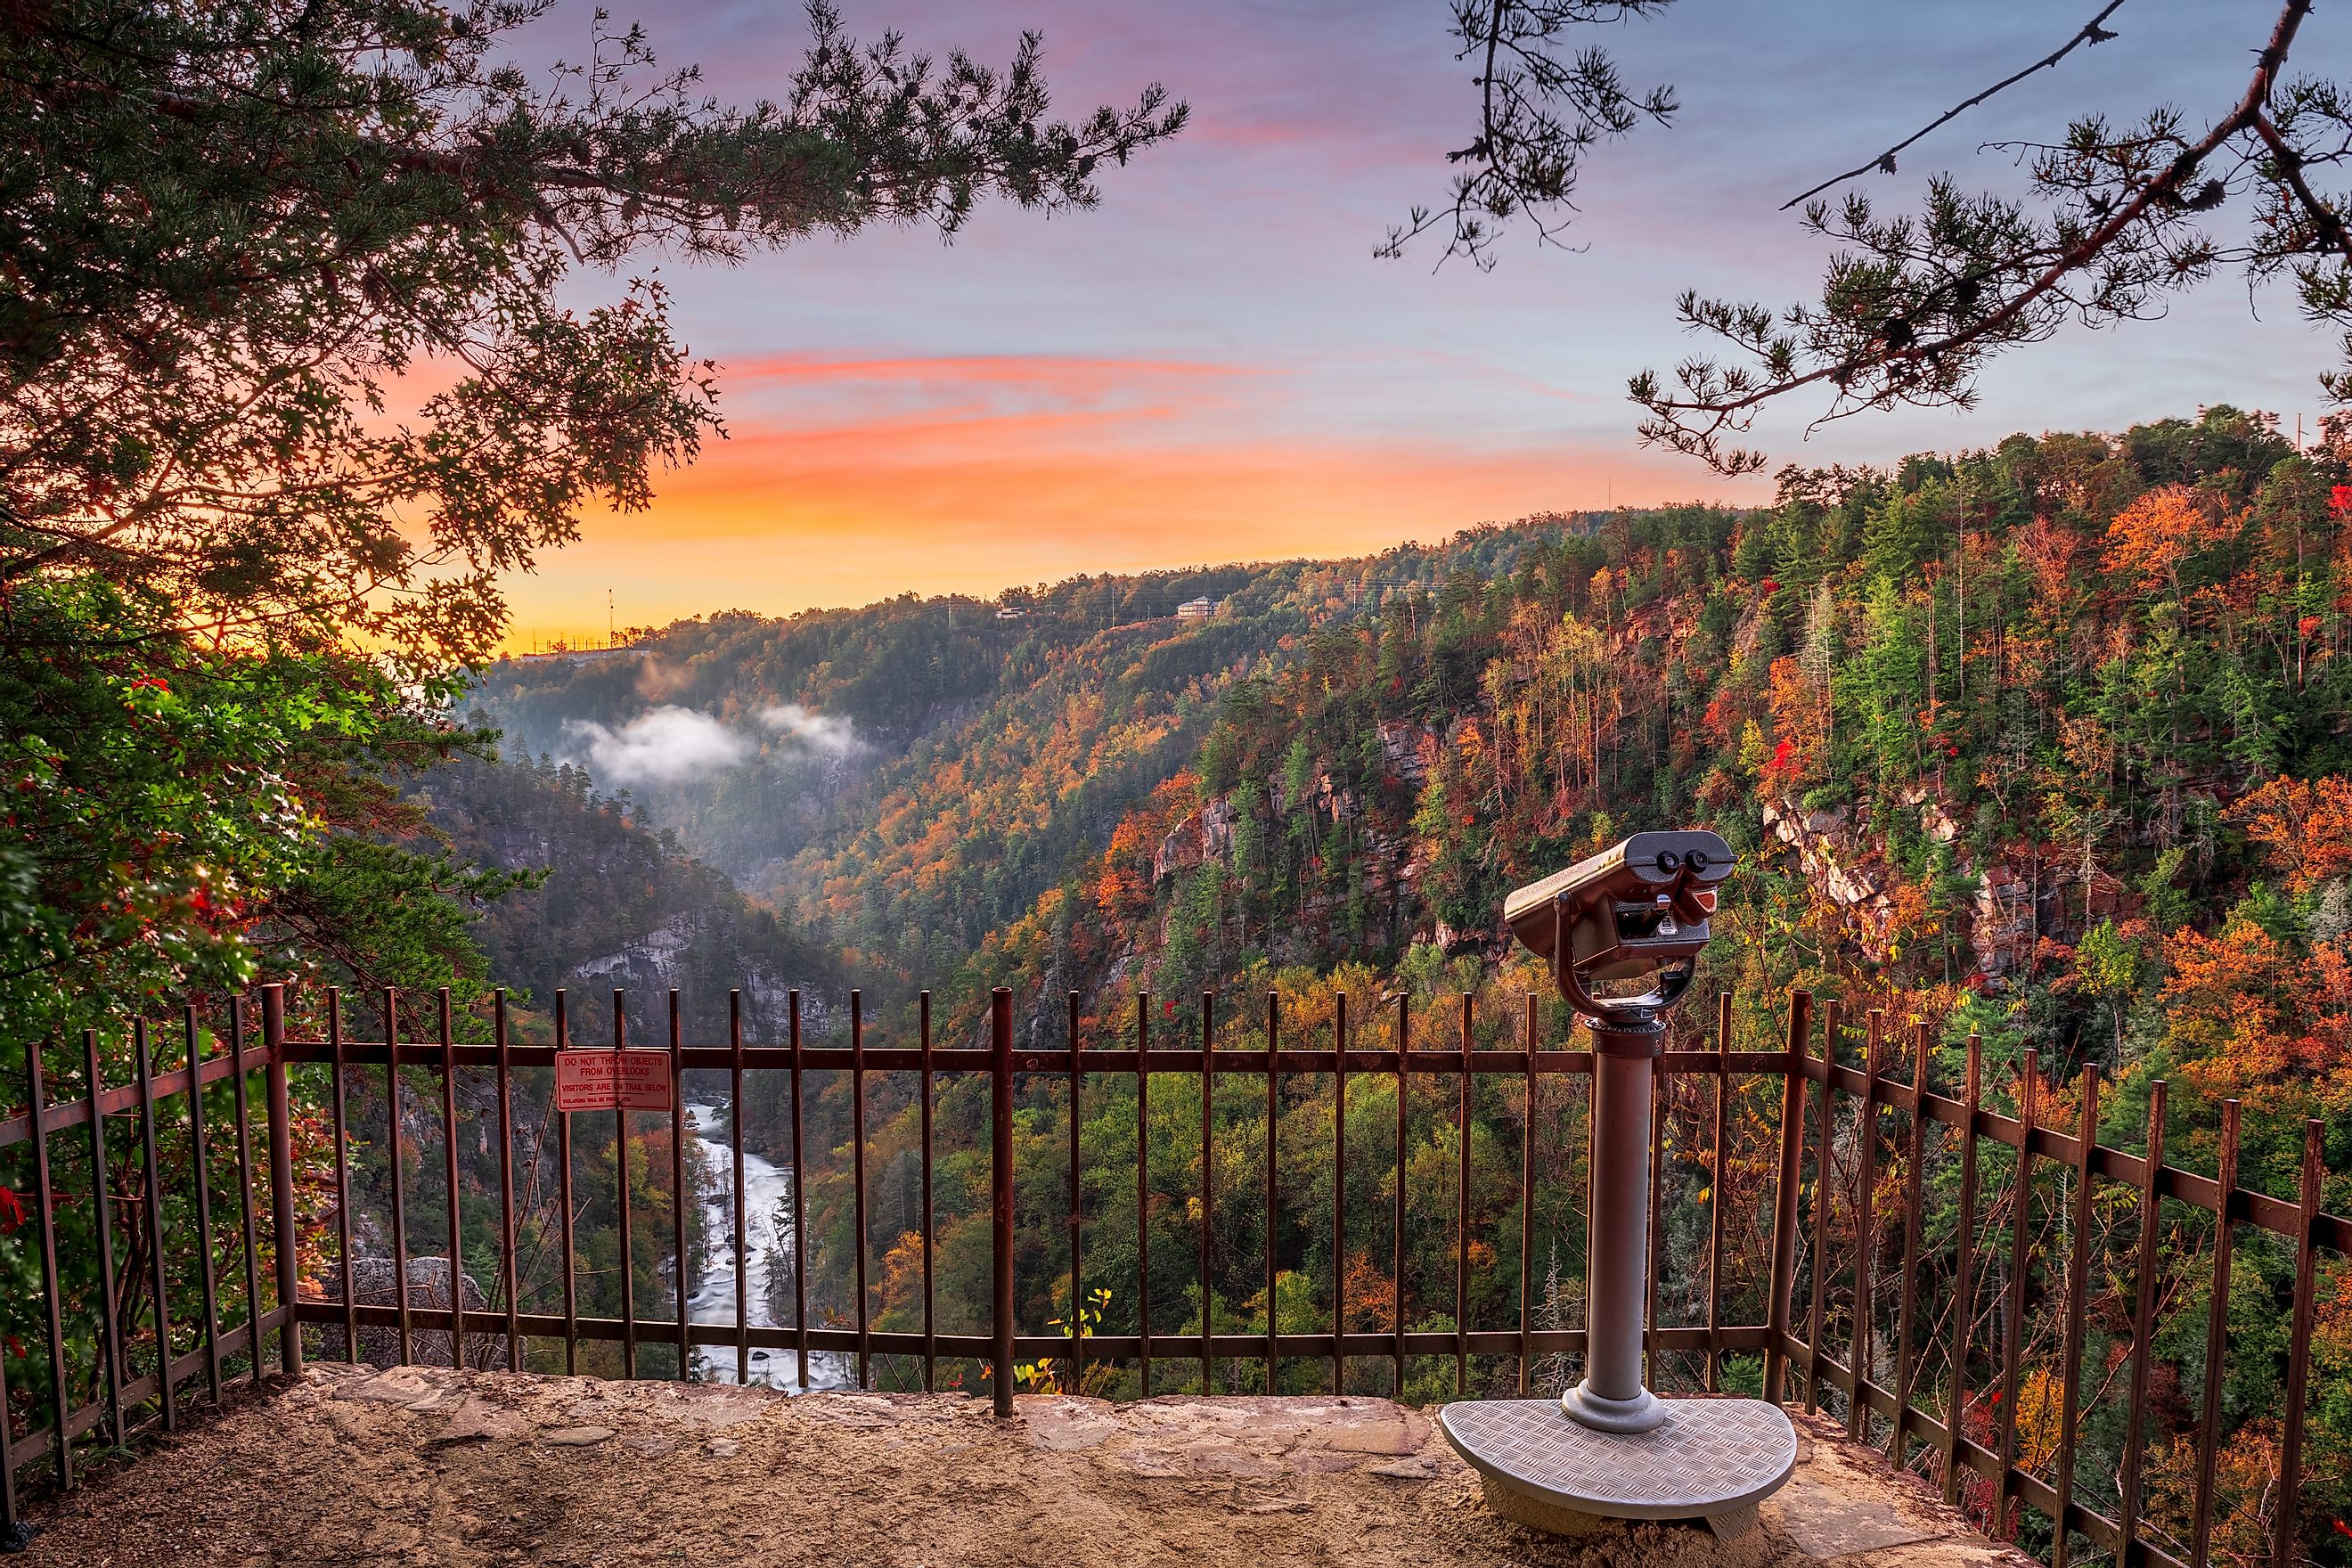 The gorgeous landscape of the Tallulah Gorge State Park.